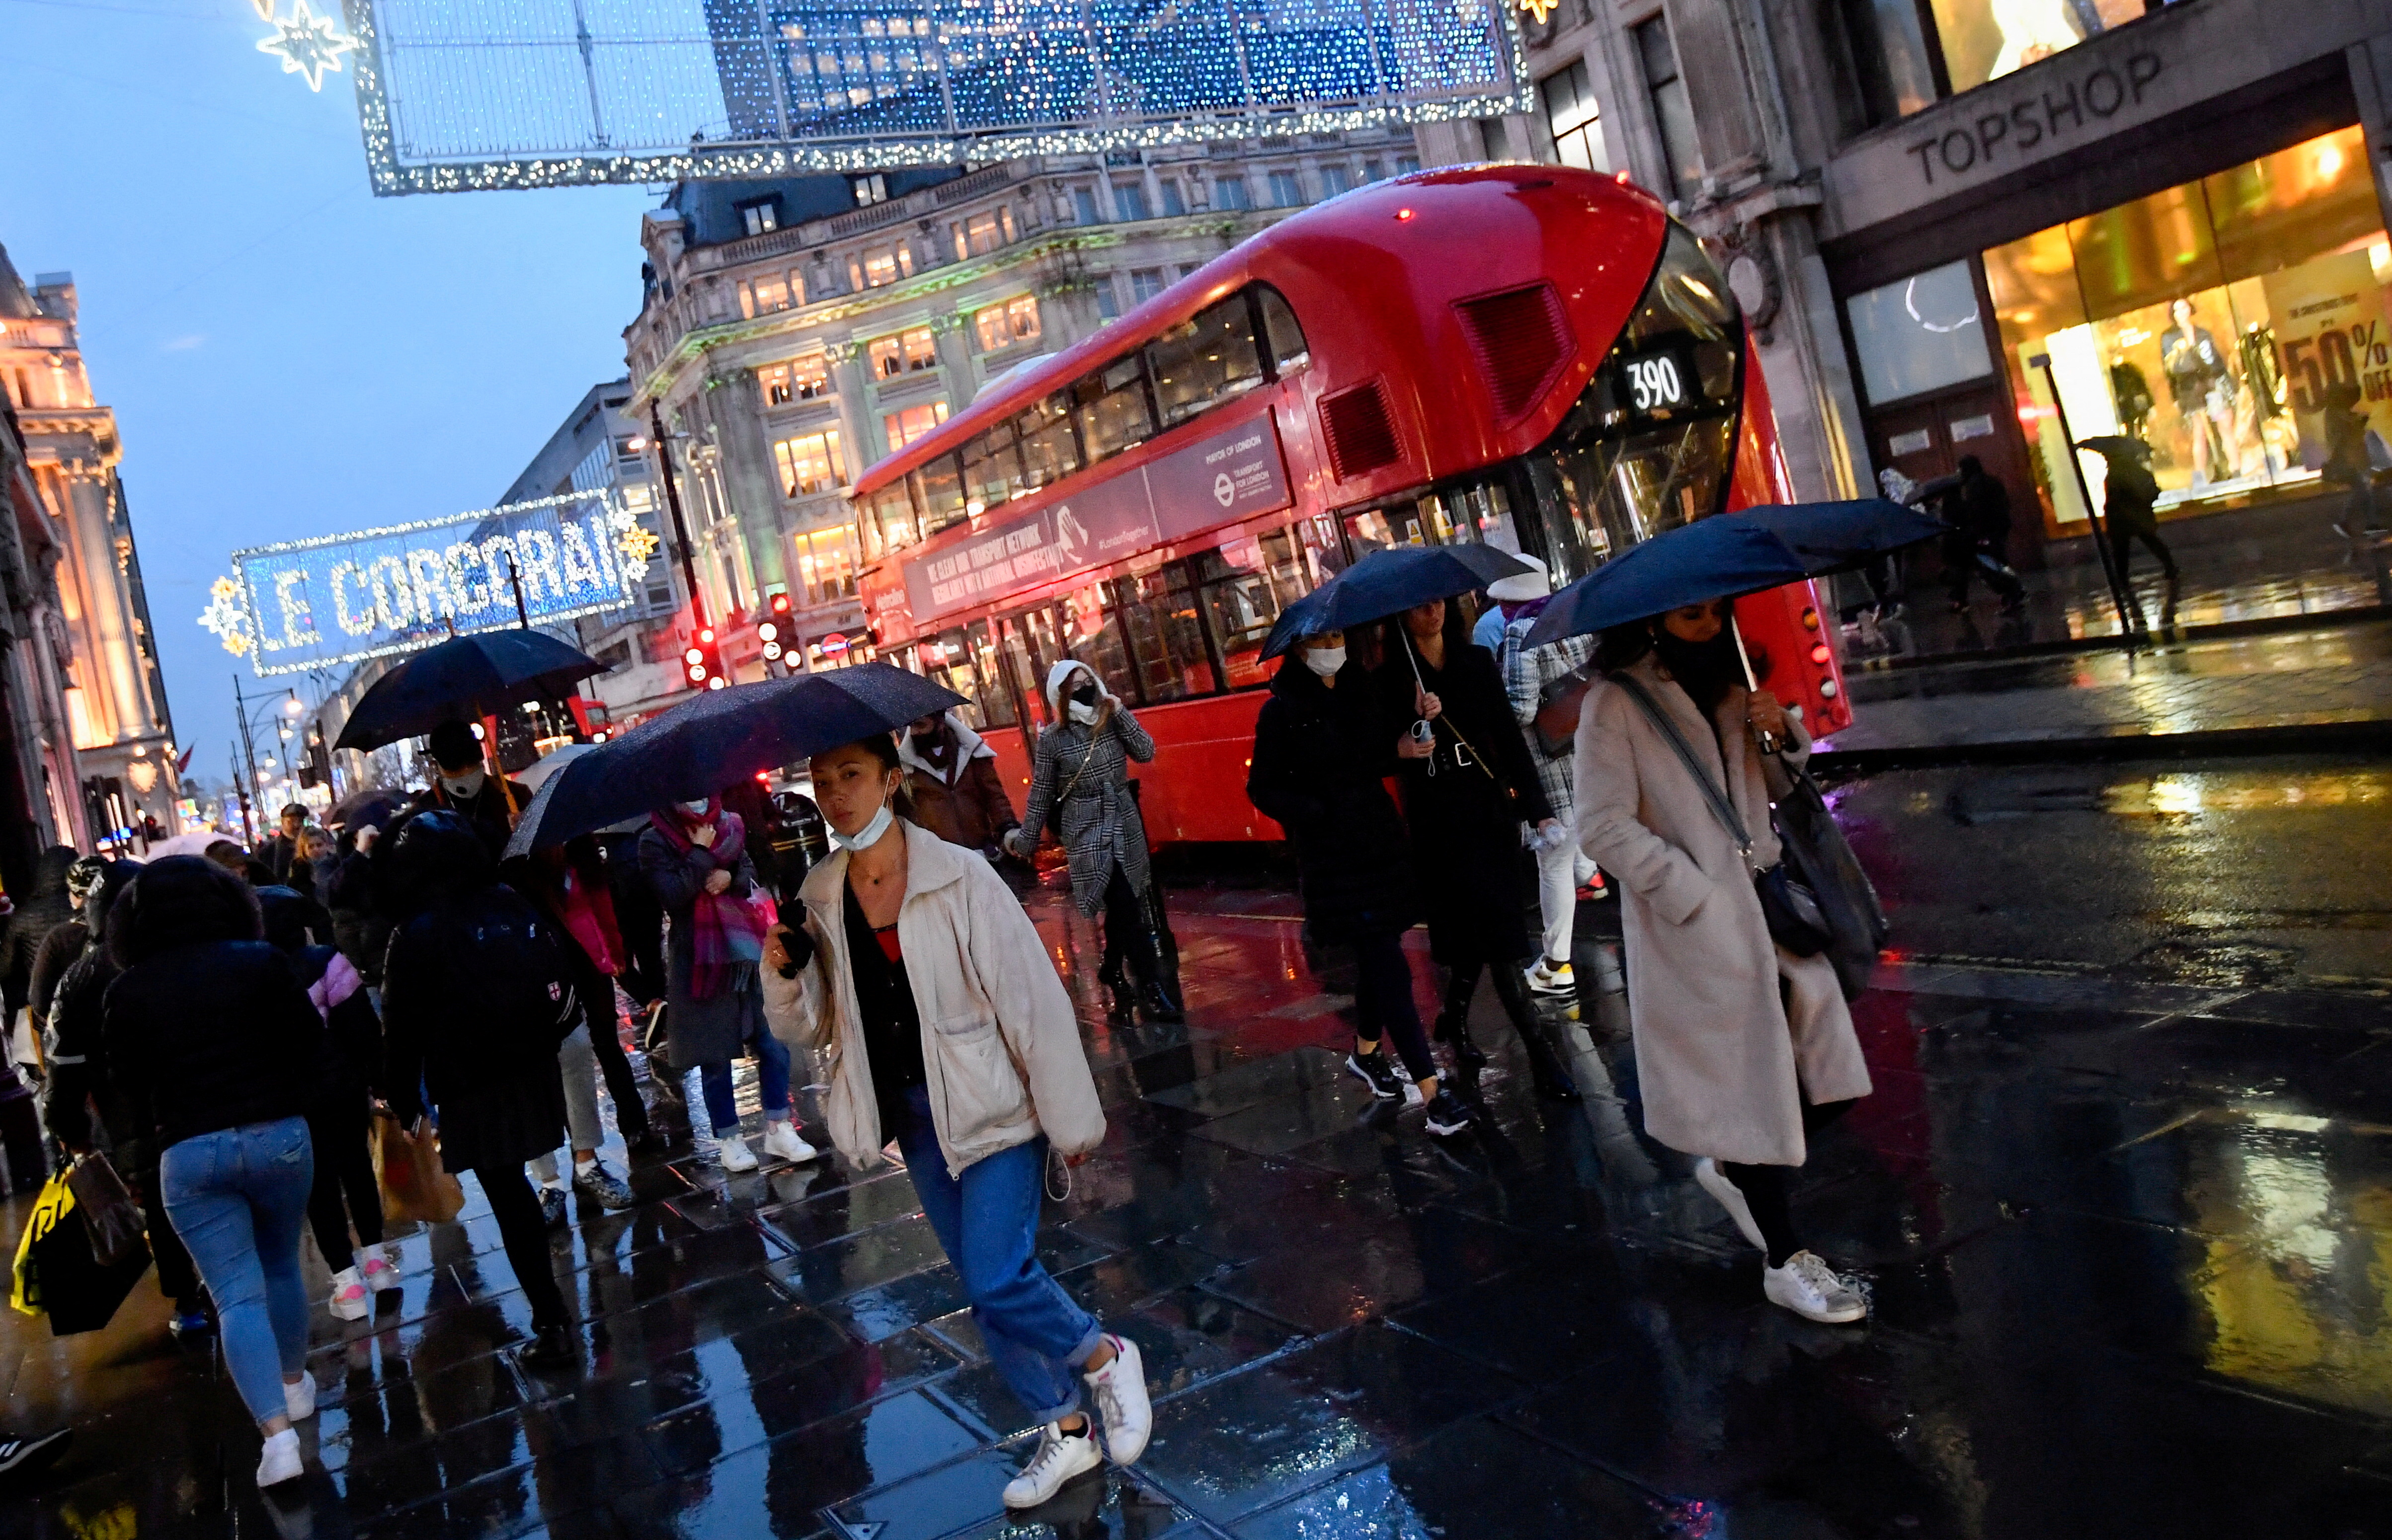 Shoppers hold umbrellas as they walk, following the outbreak of the coronavirus disease (COVID-19), at Oxford Street in London